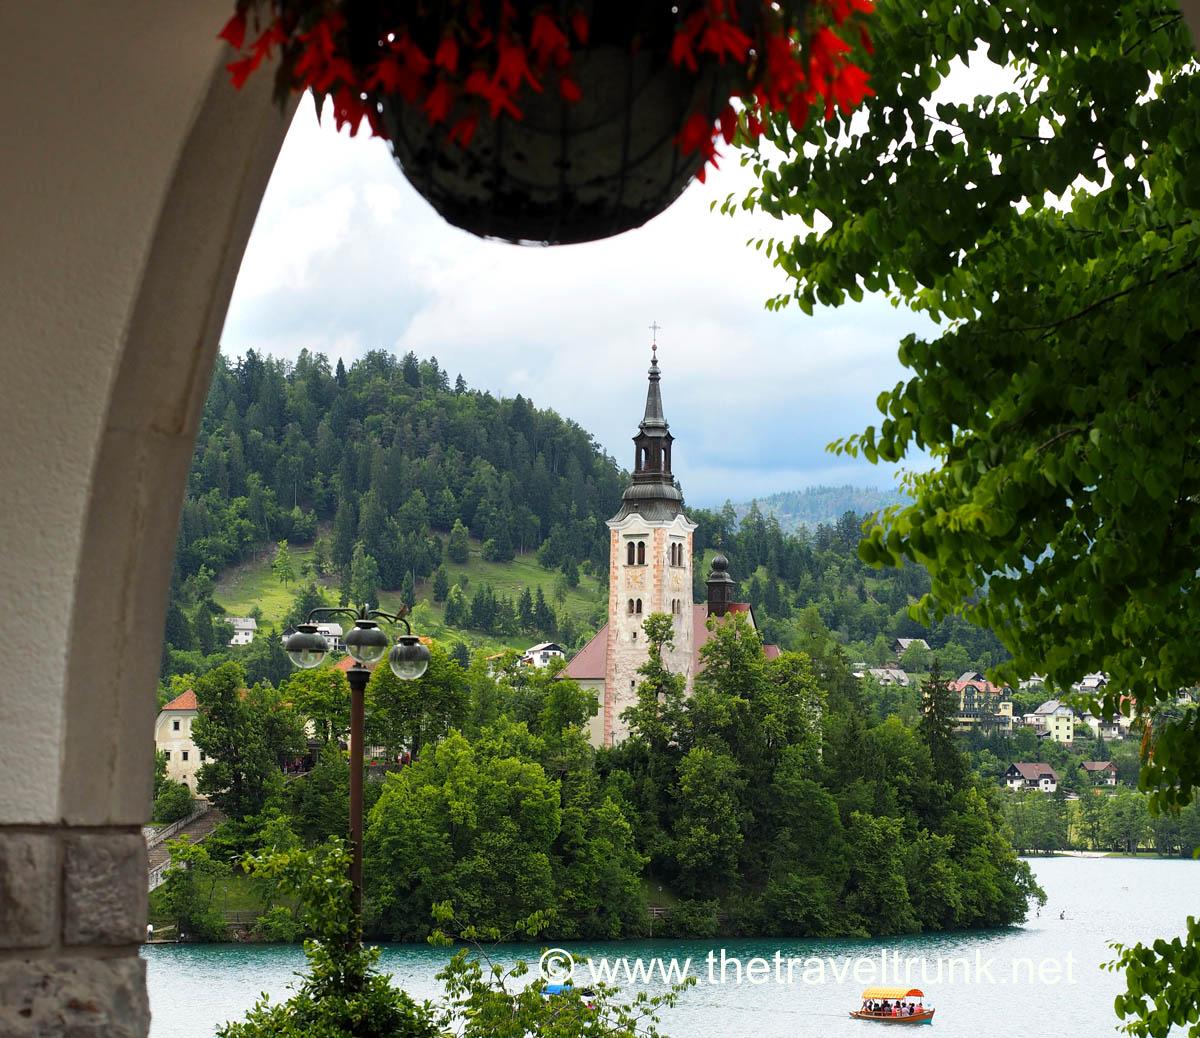 The island and Church of the Assumption of Maria in the middle of Lake Bled as viewed from the former residence of President Tito.